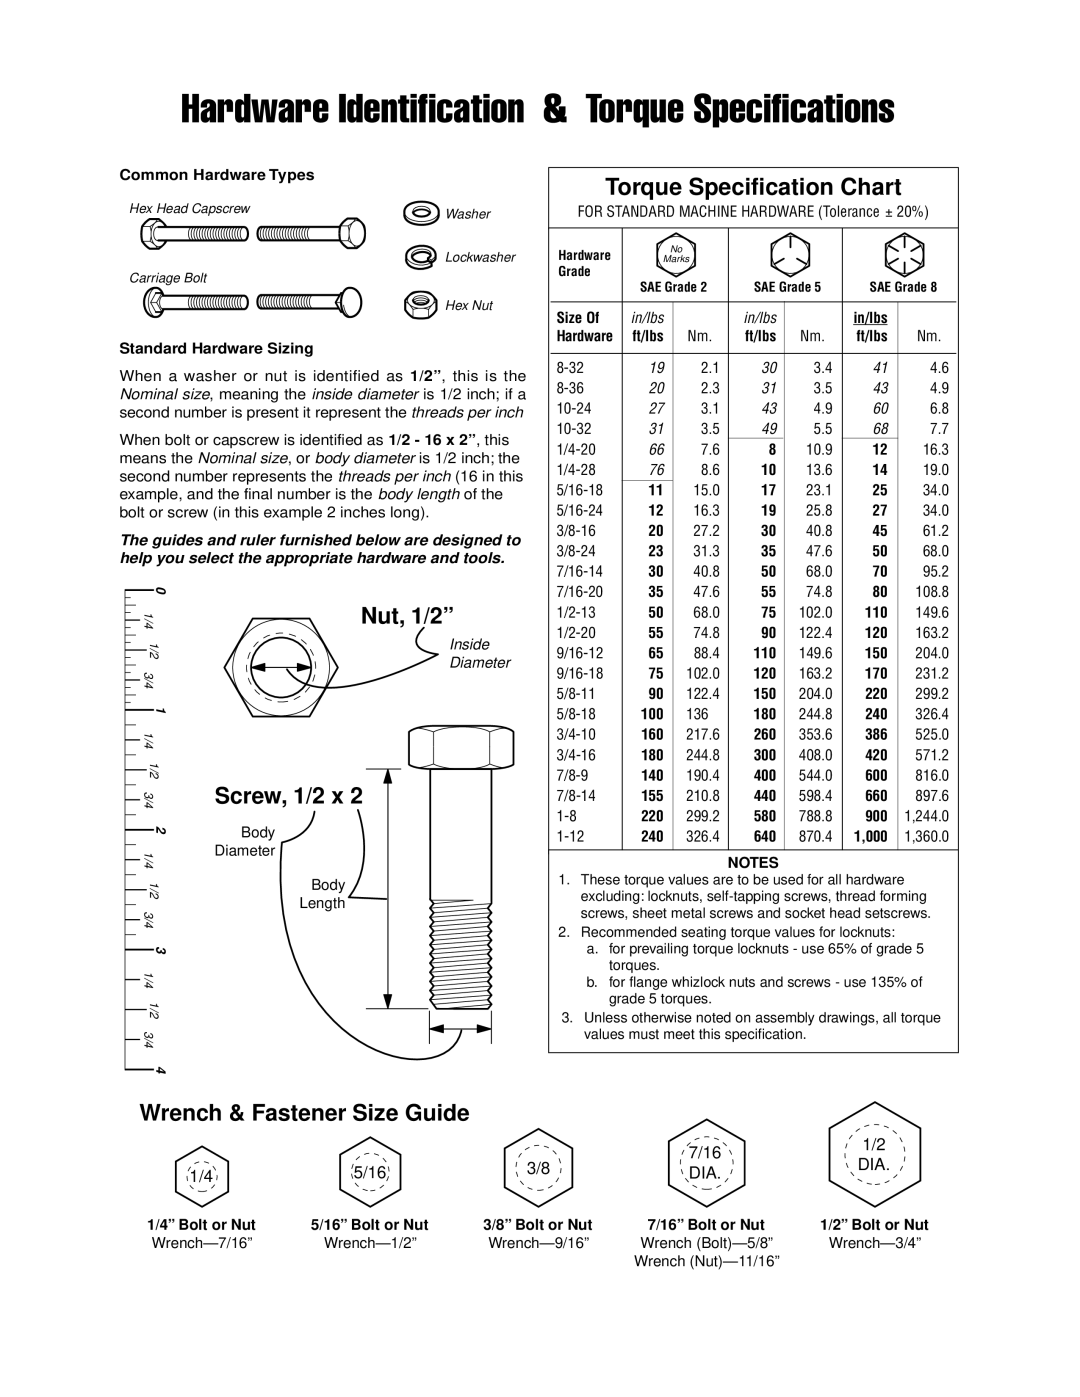 Snapper 4544 Wrench & Fastener Size Guide, Hardware Identification & Torque Specifications, Torque Specification Chart 